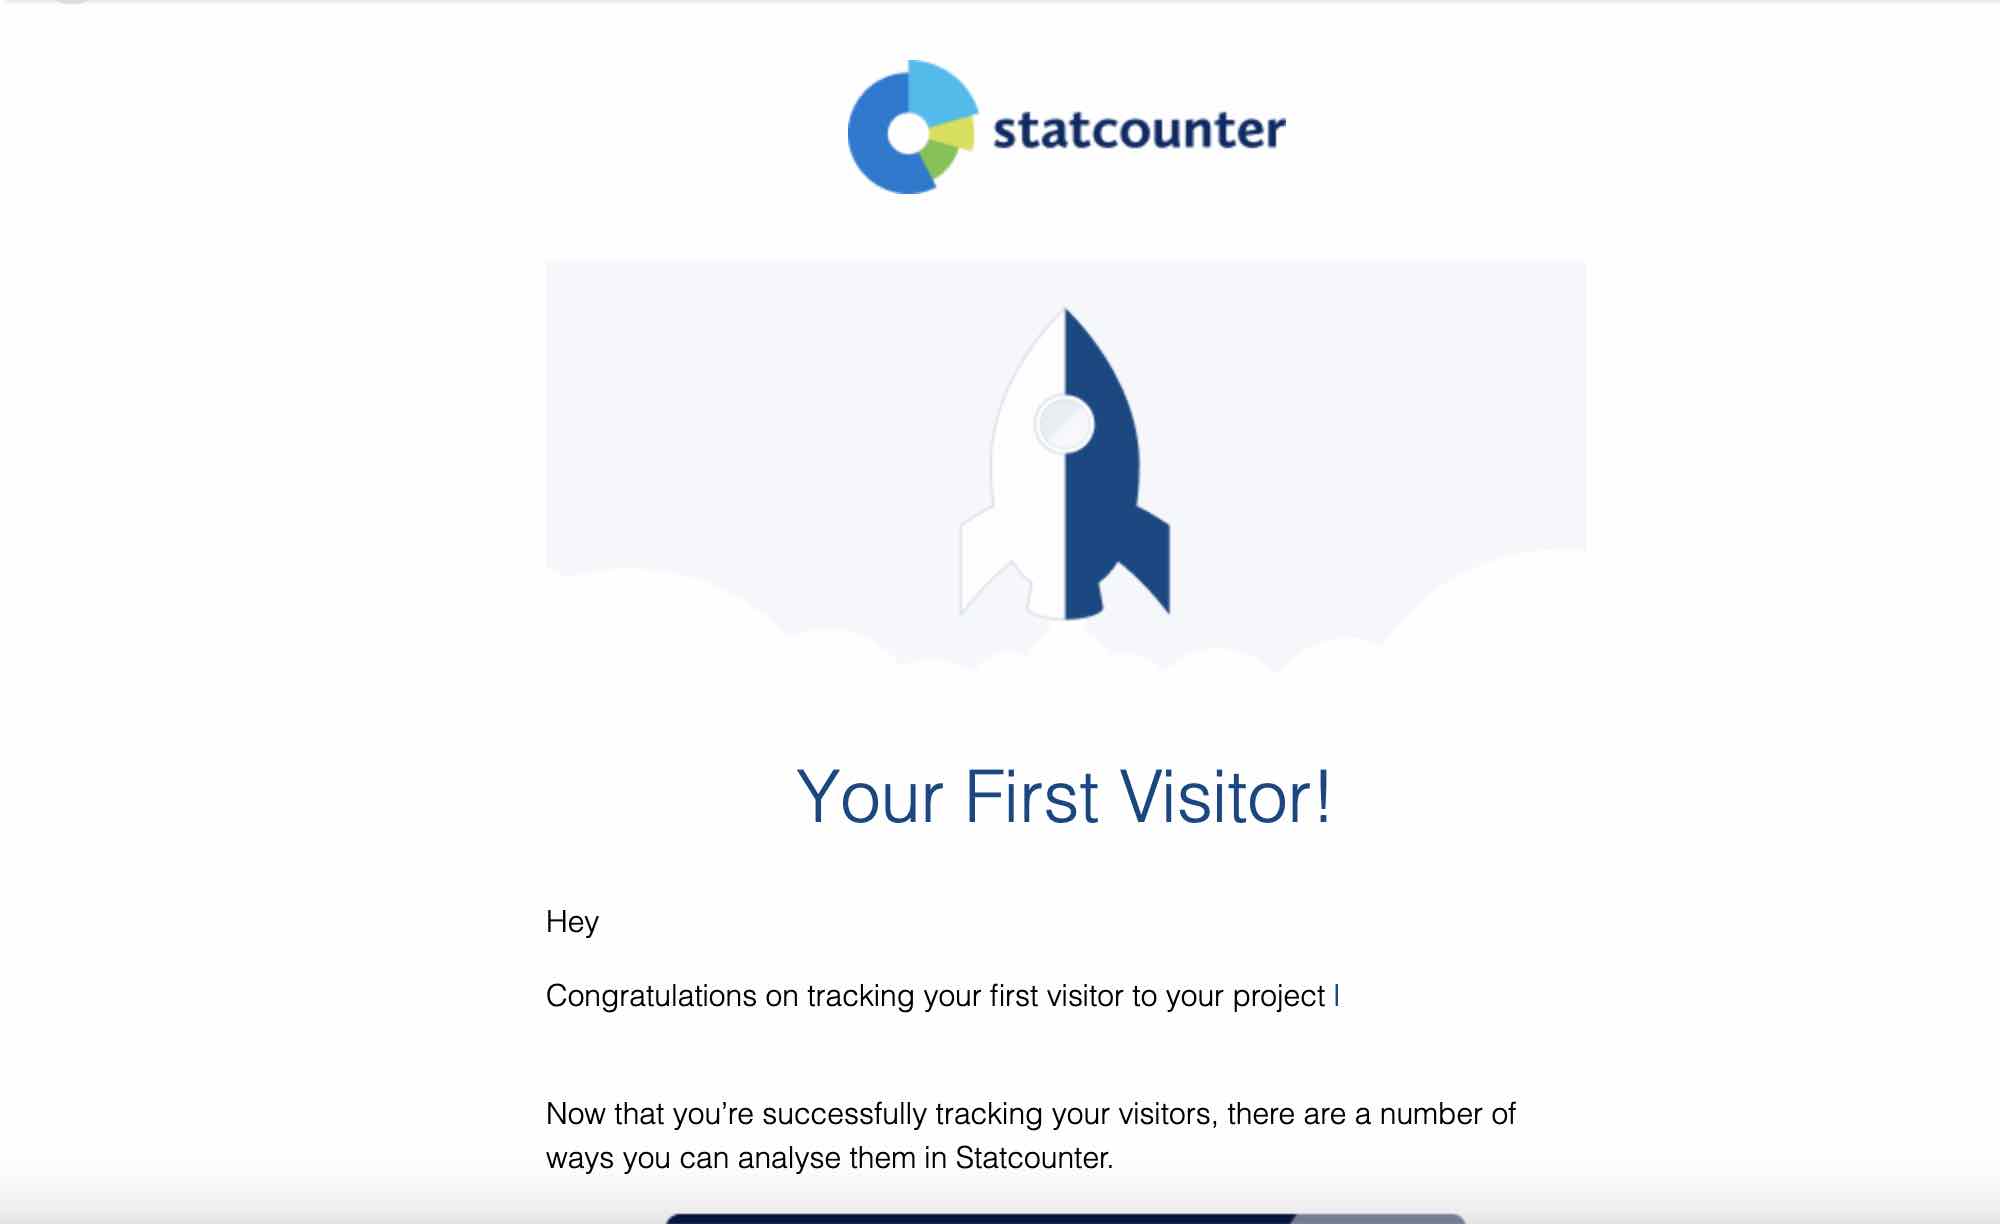 screenshot of email from statcounter, notifying that the first visitor was successfully tracked